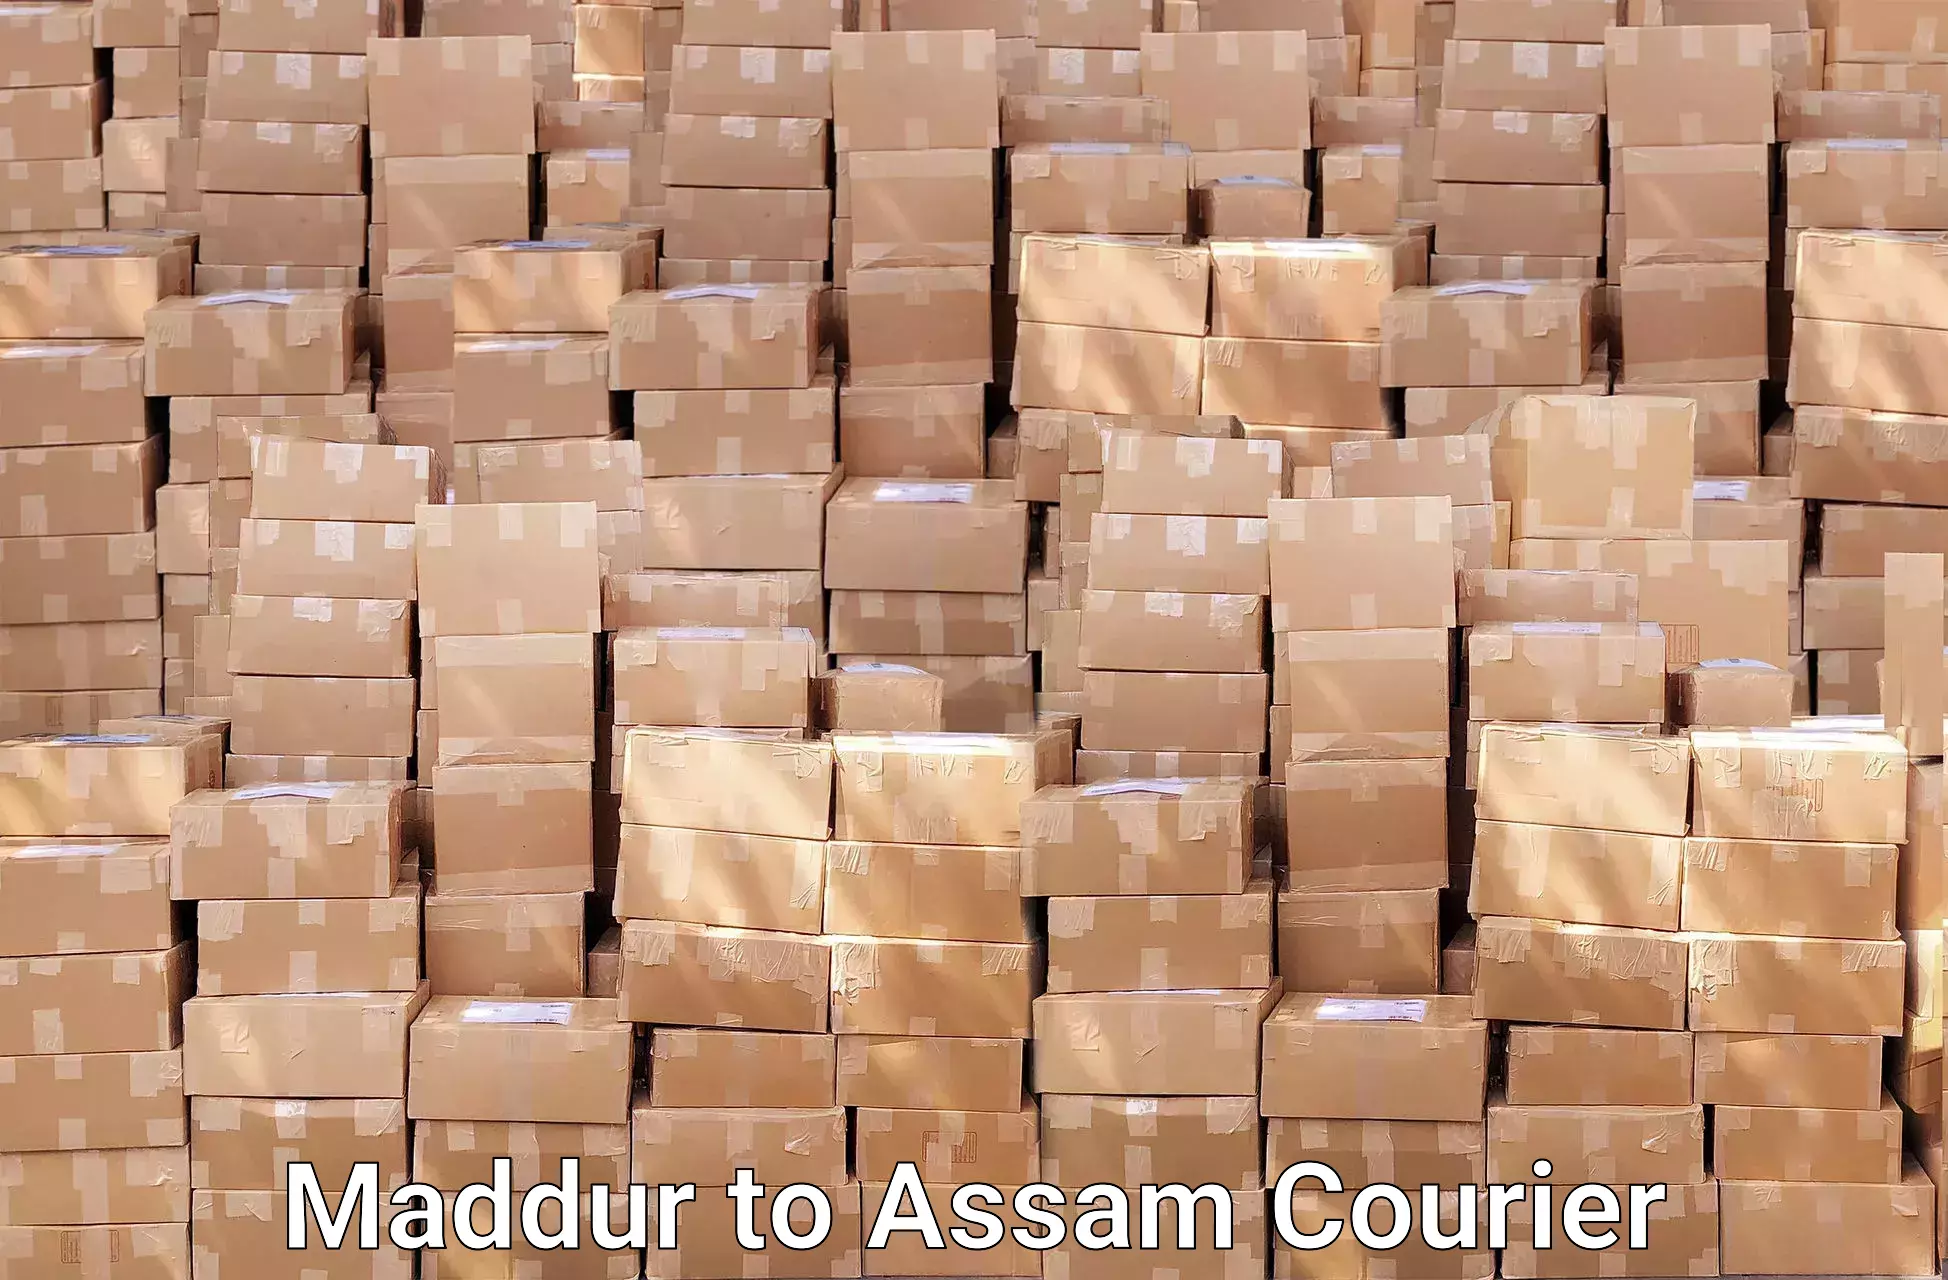 Quality relocation services Maddur to Nagaon